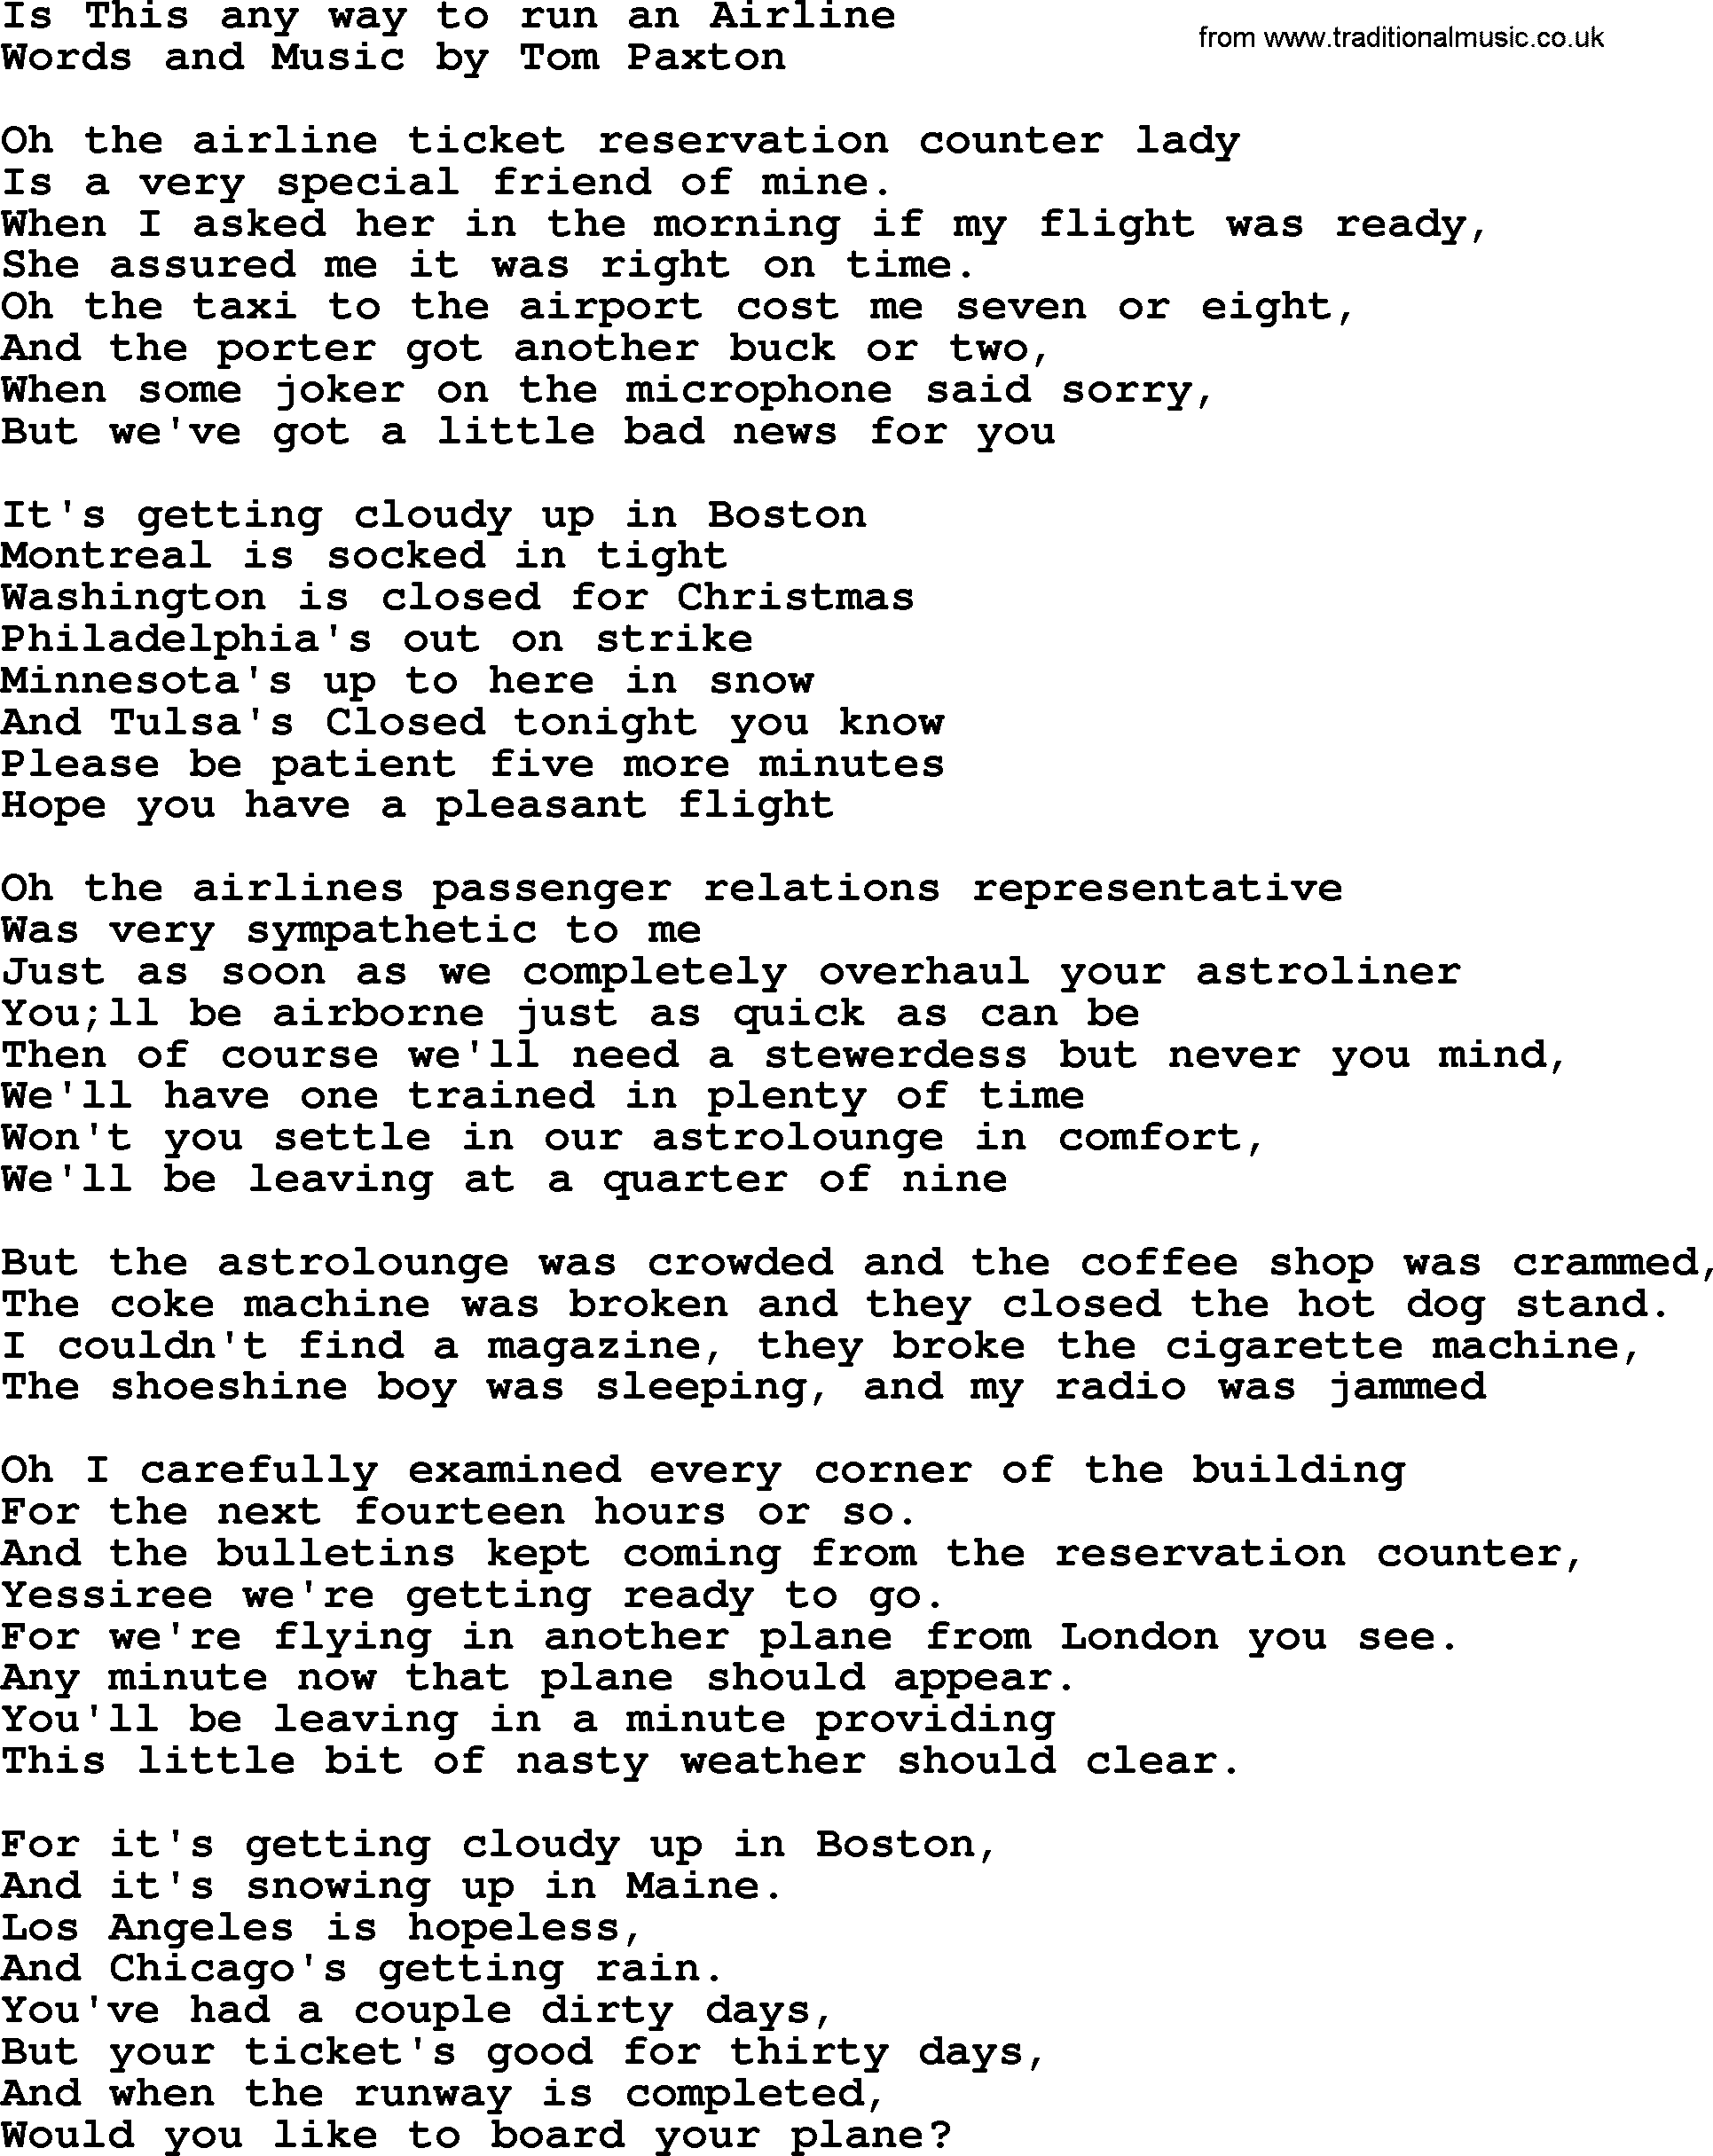 Tom Paxton song: Is This Any Way To Run An Airline, lyrics